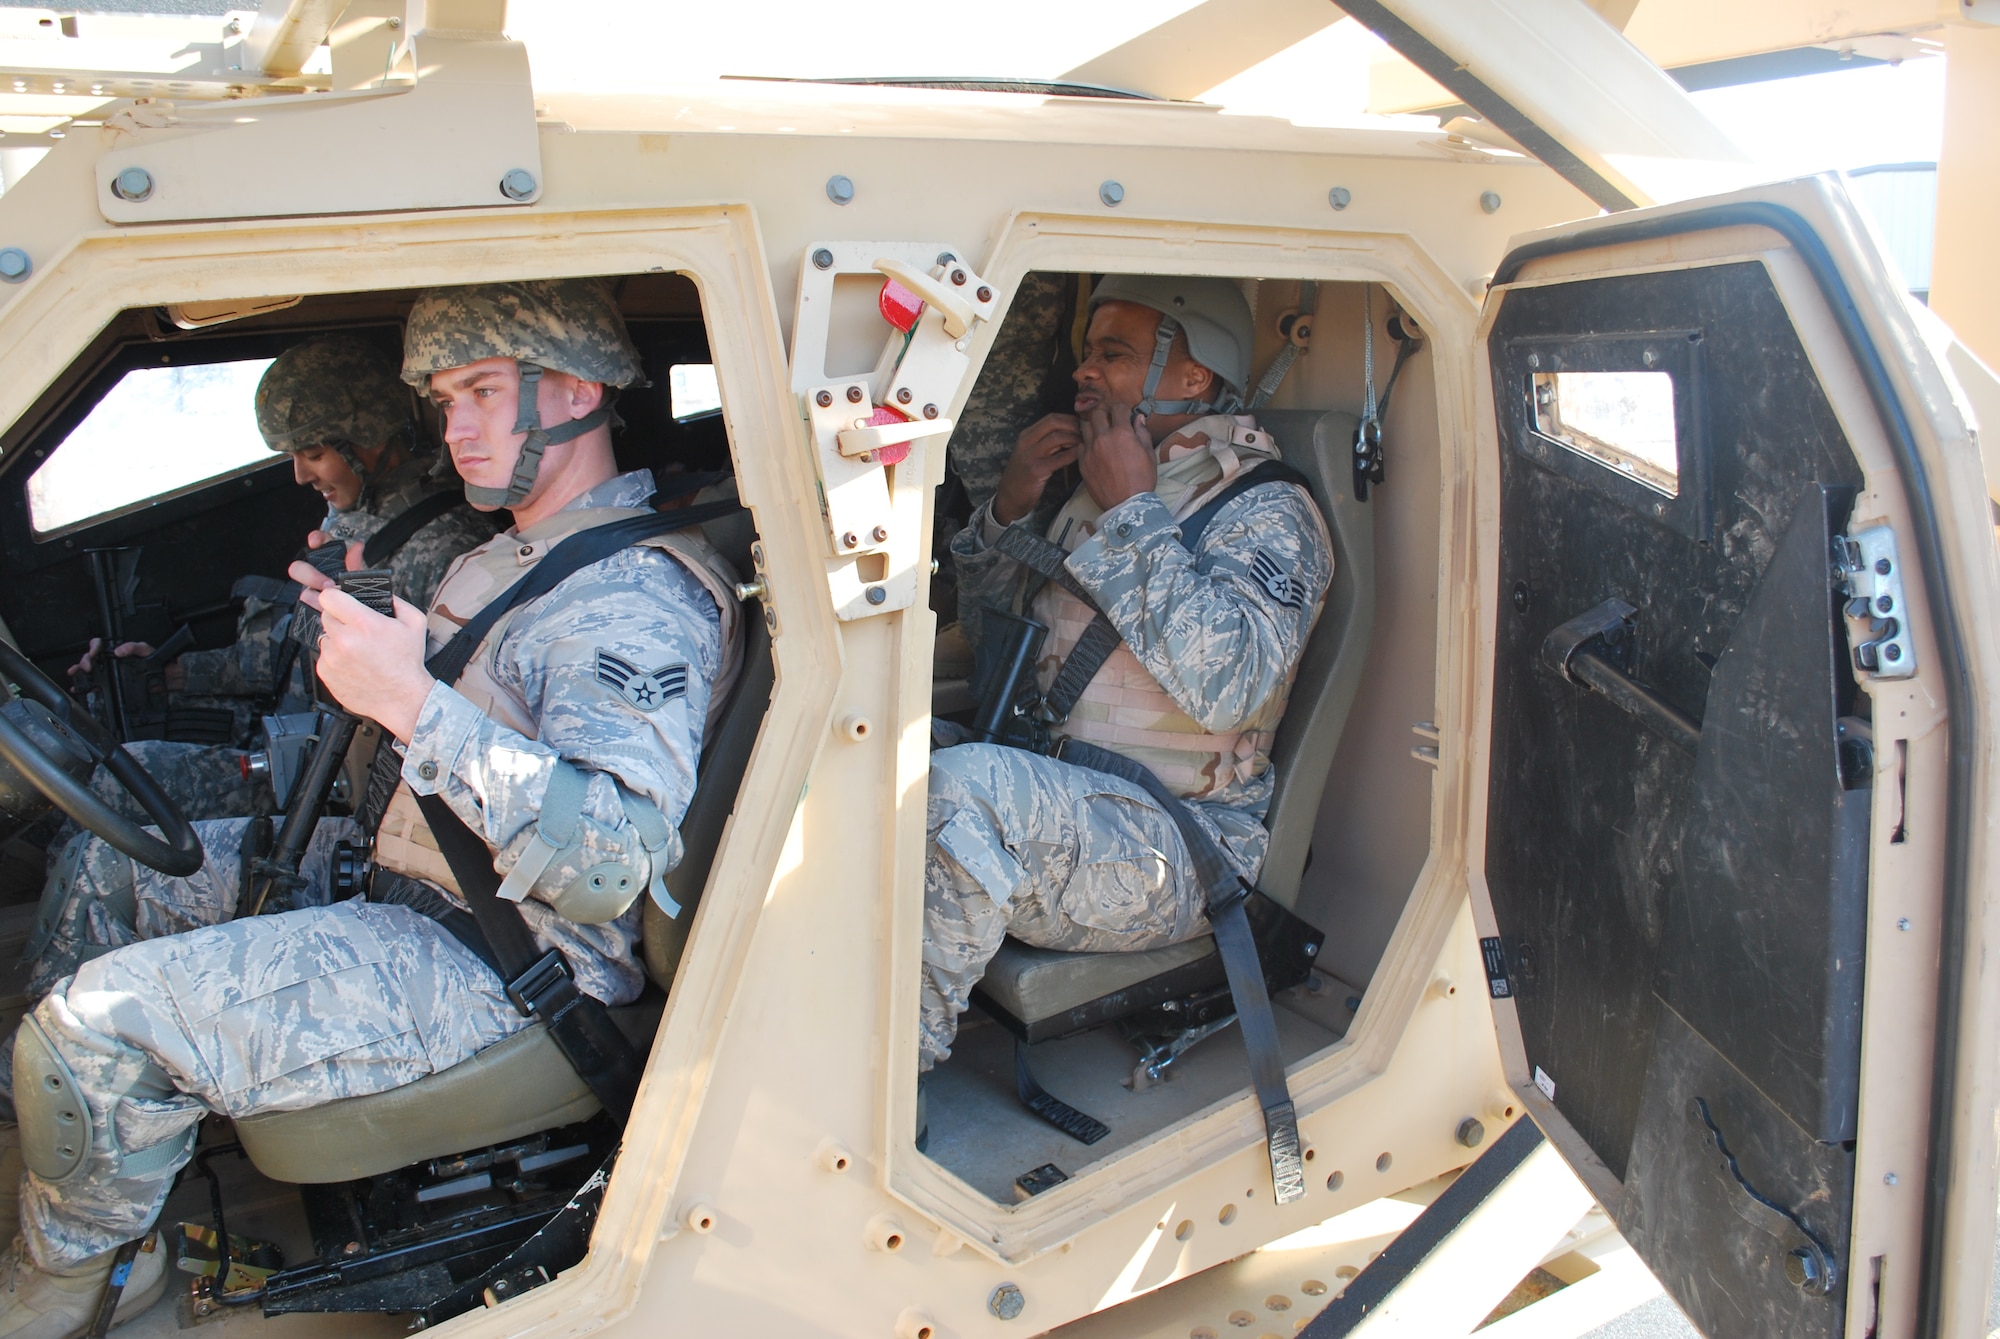 Senior Airman  James Randolph and Staff Sgt. Marlow Dotts pull their safety belts tight as they prepare to roll over in the Mine Resistant Ambush Protected vehicle roll-over egress trainer.  Randolph, assigned to the 28th Contracting Squadron, Ellsworth Air Force Base, S.D., and Dotts, 87th Contracting Squadron, McGuire Air Force Base, N.J., joined 21 other contracting airmen participated in Operation Joint Dawn 2011, a U.S. Army Expeditionary Contracting Command pre-deployment exercise held at Fort Campbell, Ky.  (U.S. Army Photo by Ed Worley)